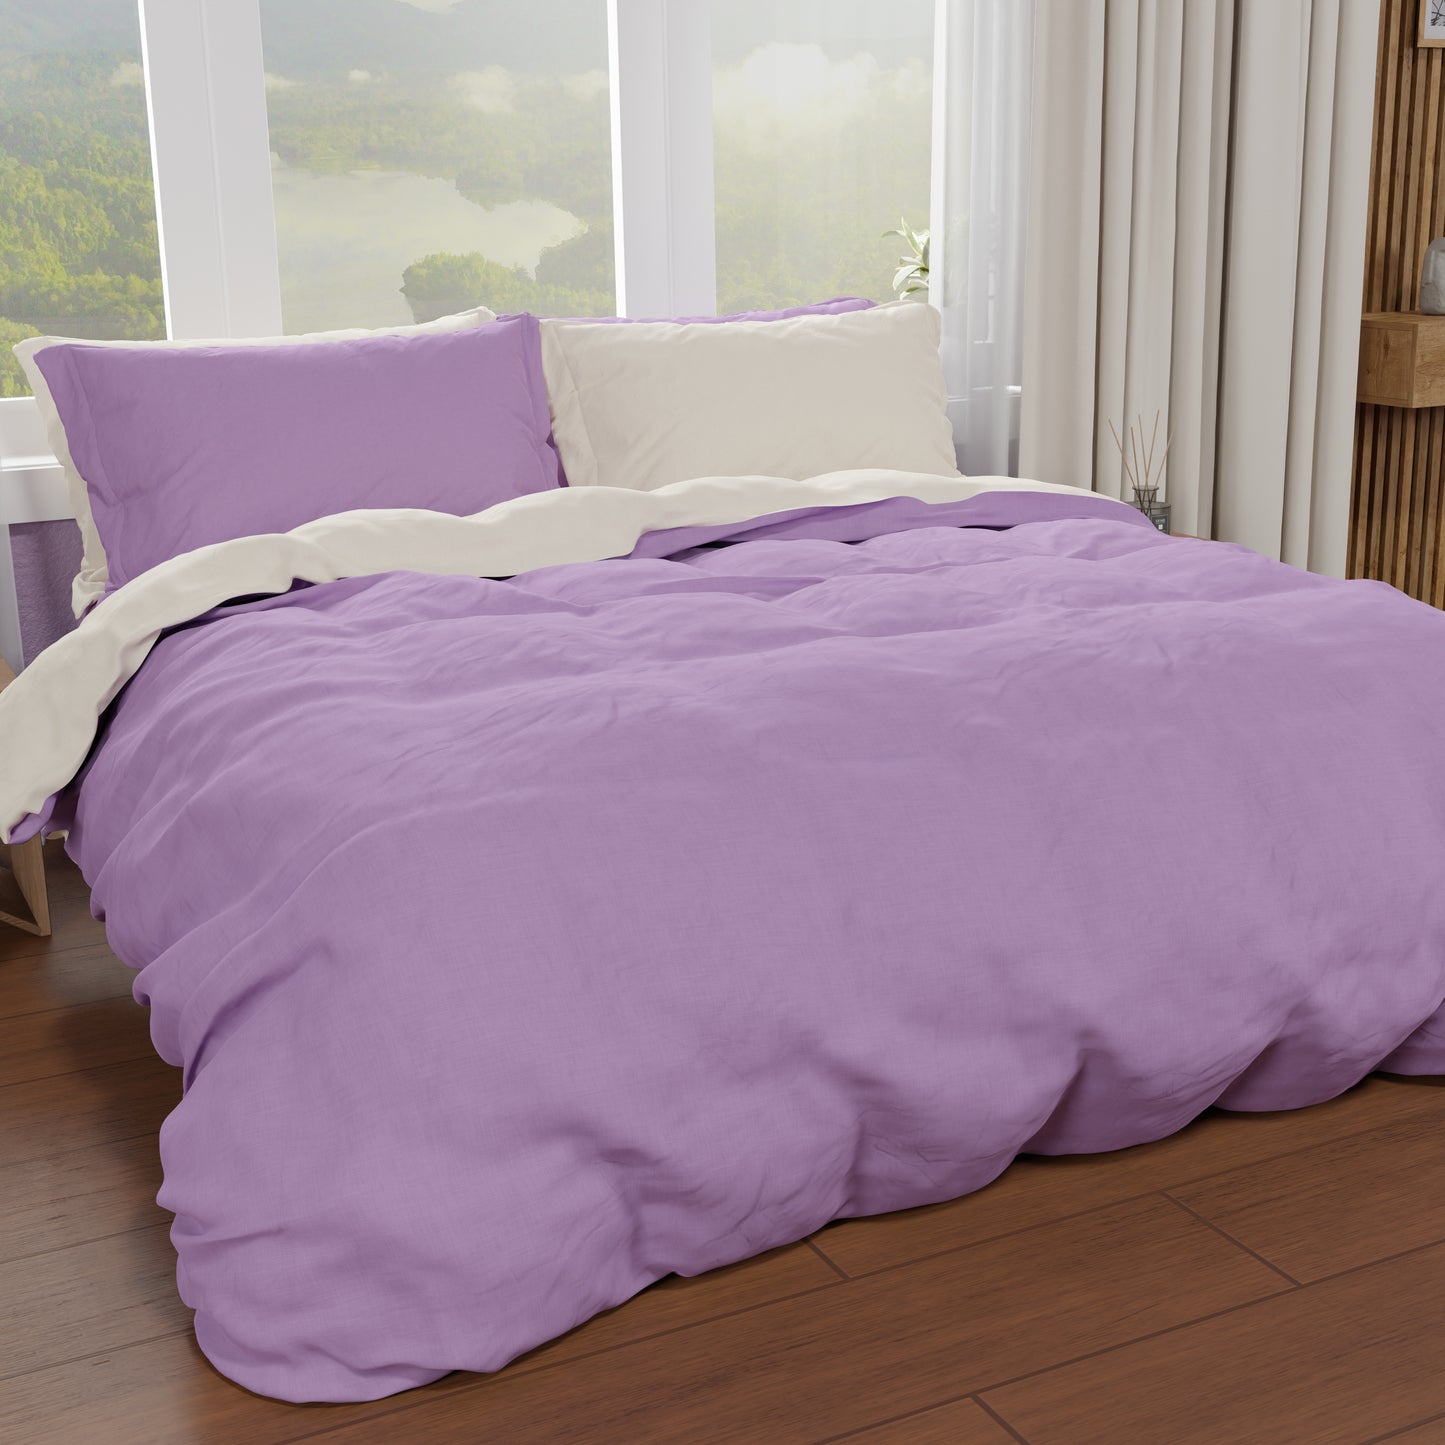 Double Duvet Cover, Duvet Cover and Pillowcases, Lilac/Cream